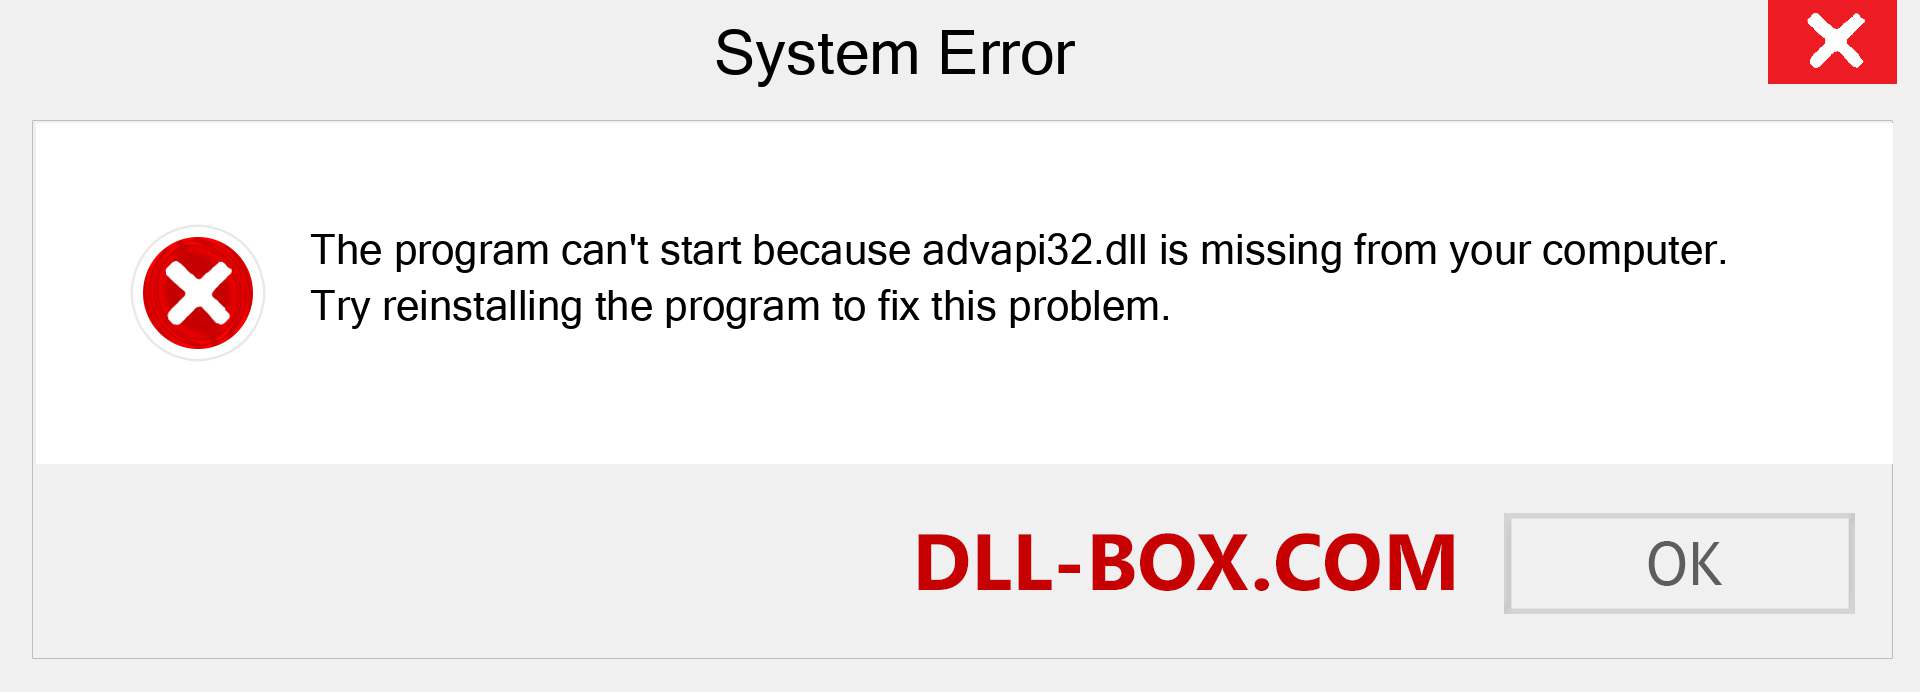  advapi32.dll file is missing?. Download for Windows 7, 8, 10 - Fix  advapi32 dll Missing Error on Windows, photos, images